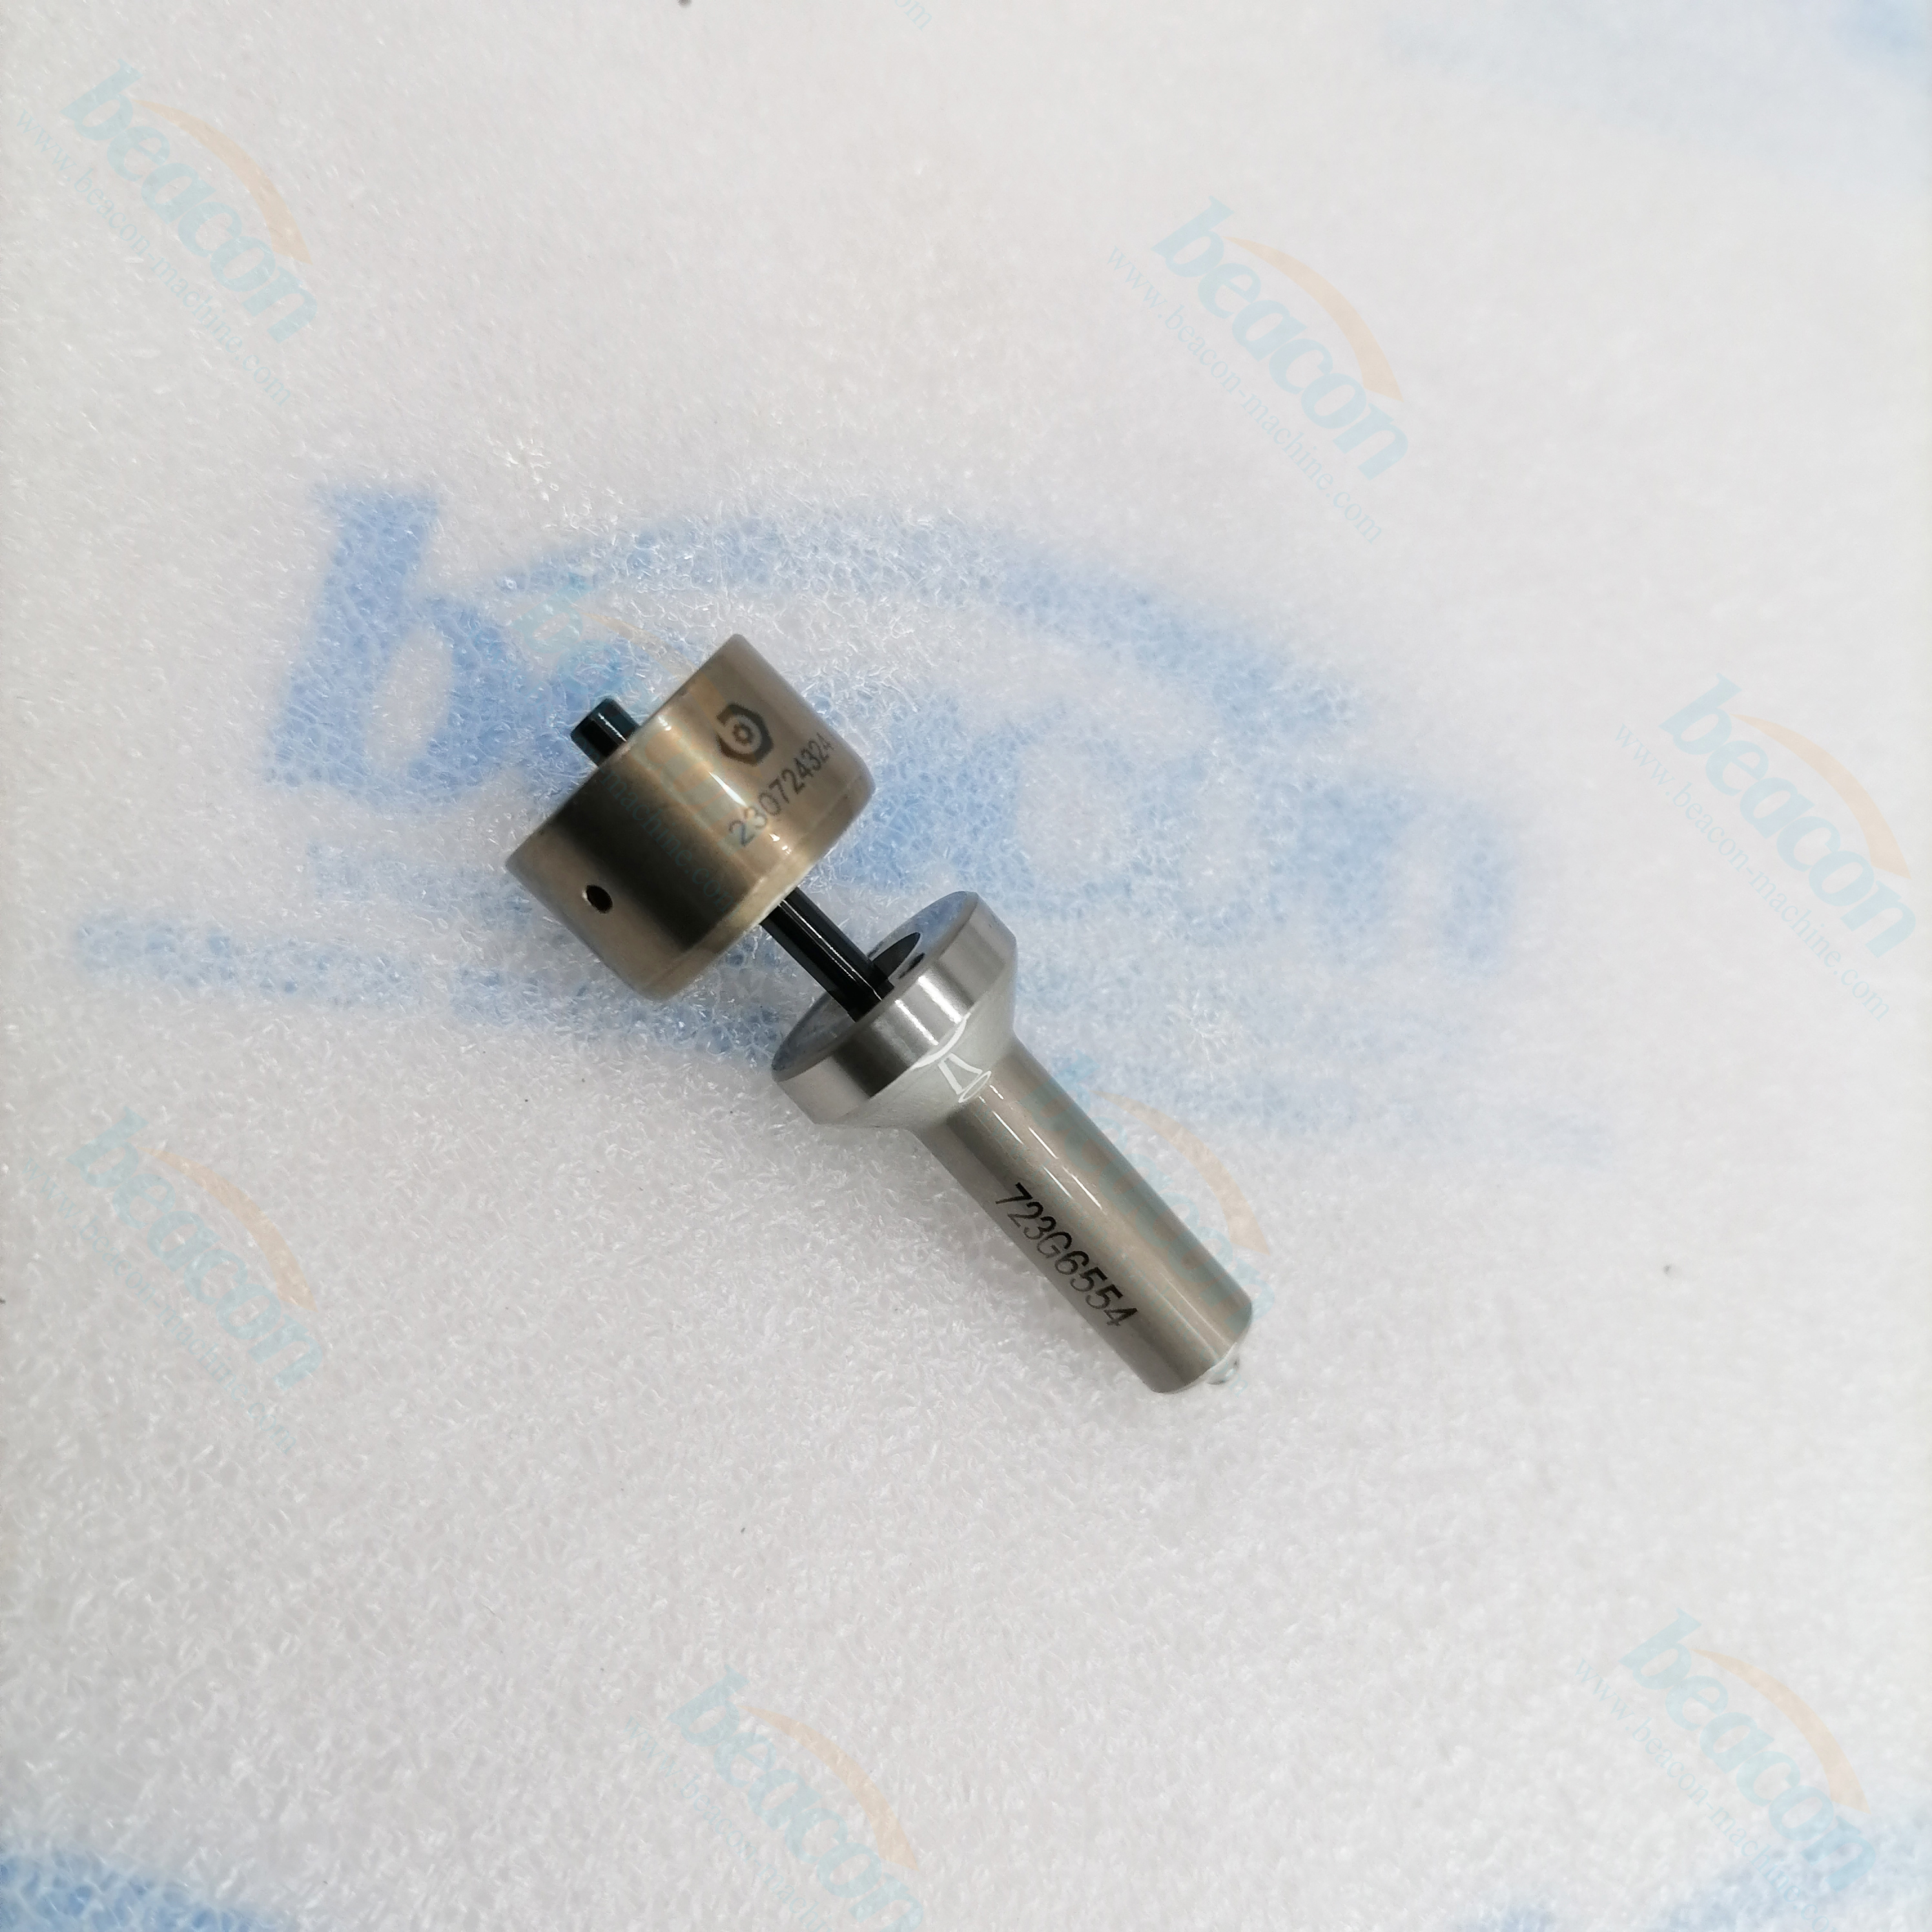  high quality Nozzle for C7 engine injector C7 injector nozzle good replacement of original